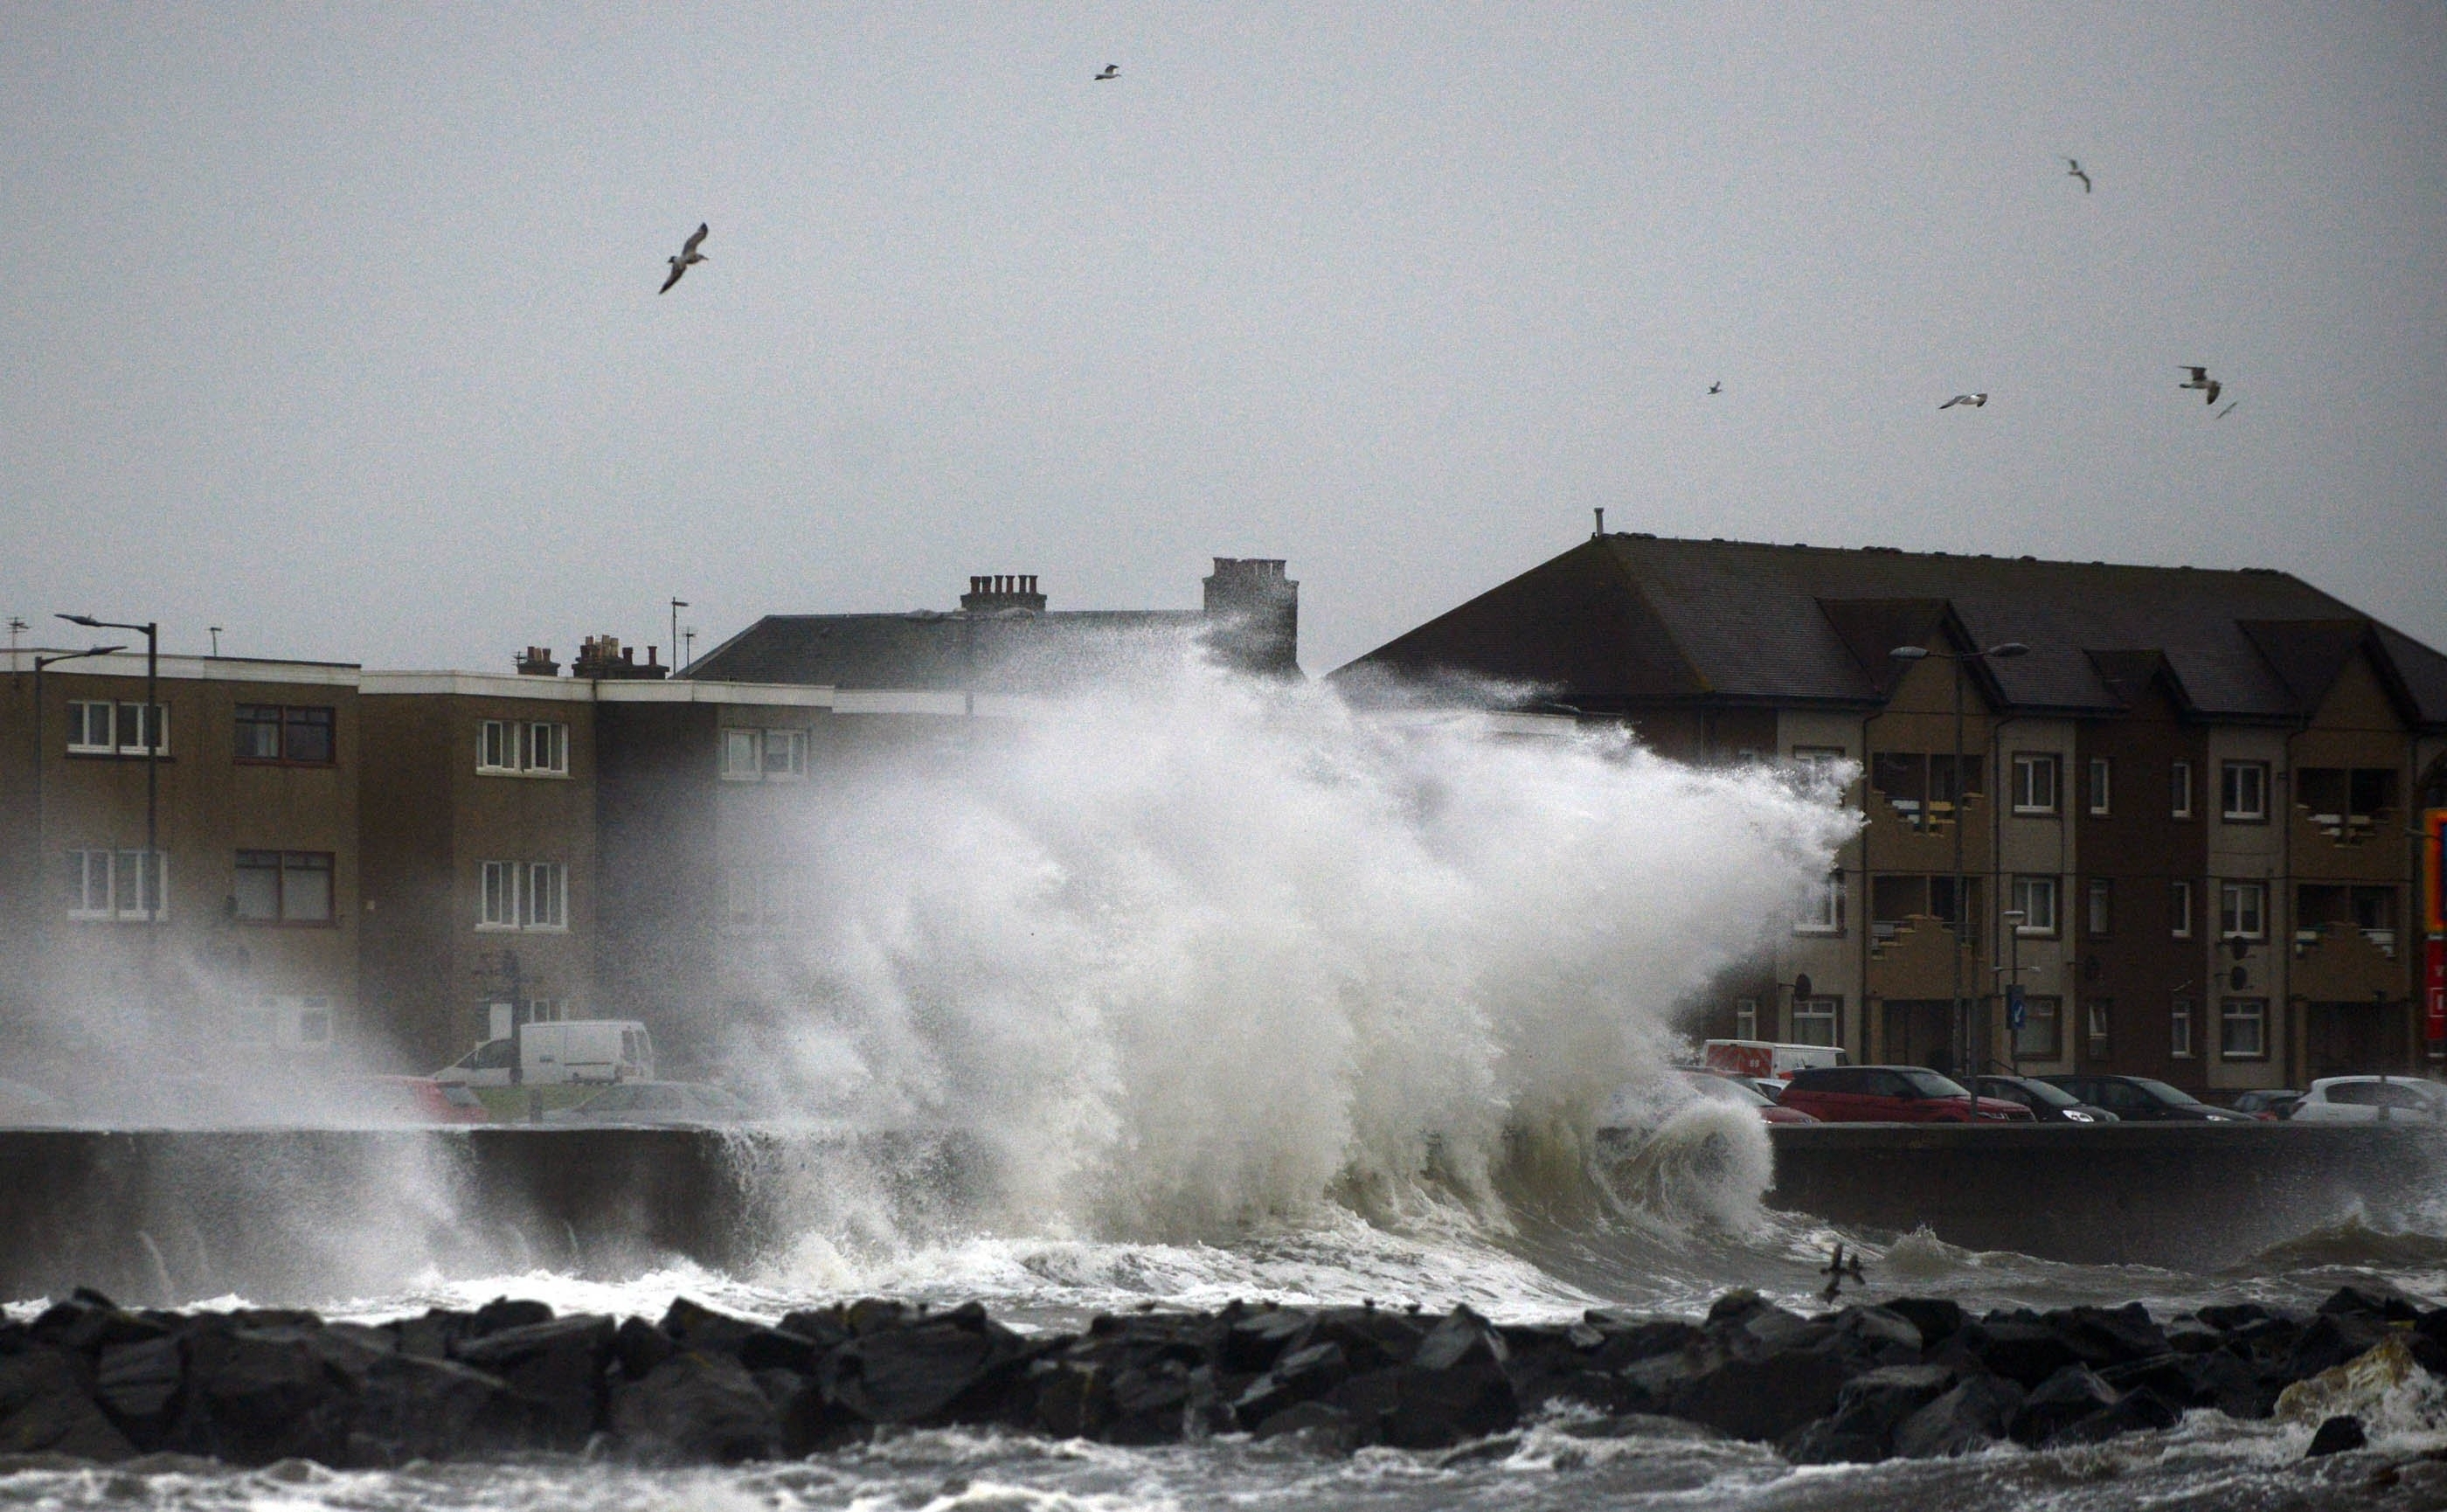 Waves crash into the town of Saltcoats, Ayrshire as the remnants of Storm Jonas batter Scotland. JANUARY 26 2016.